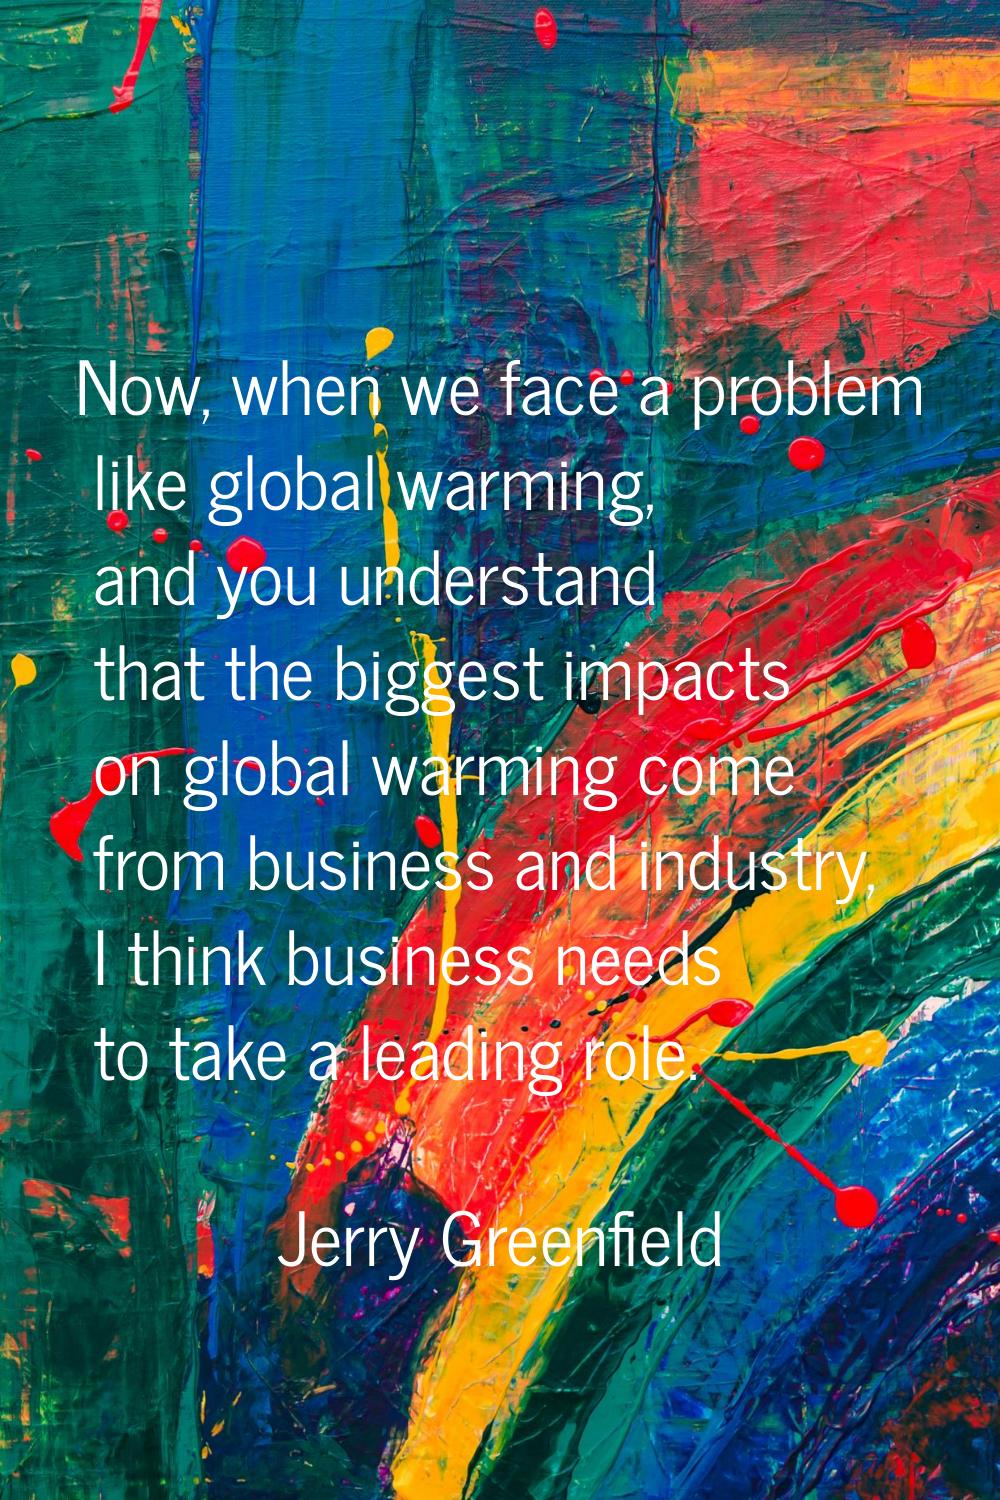 Now, when we face a problem like global warming, and you understand that the biggest impacts on glo